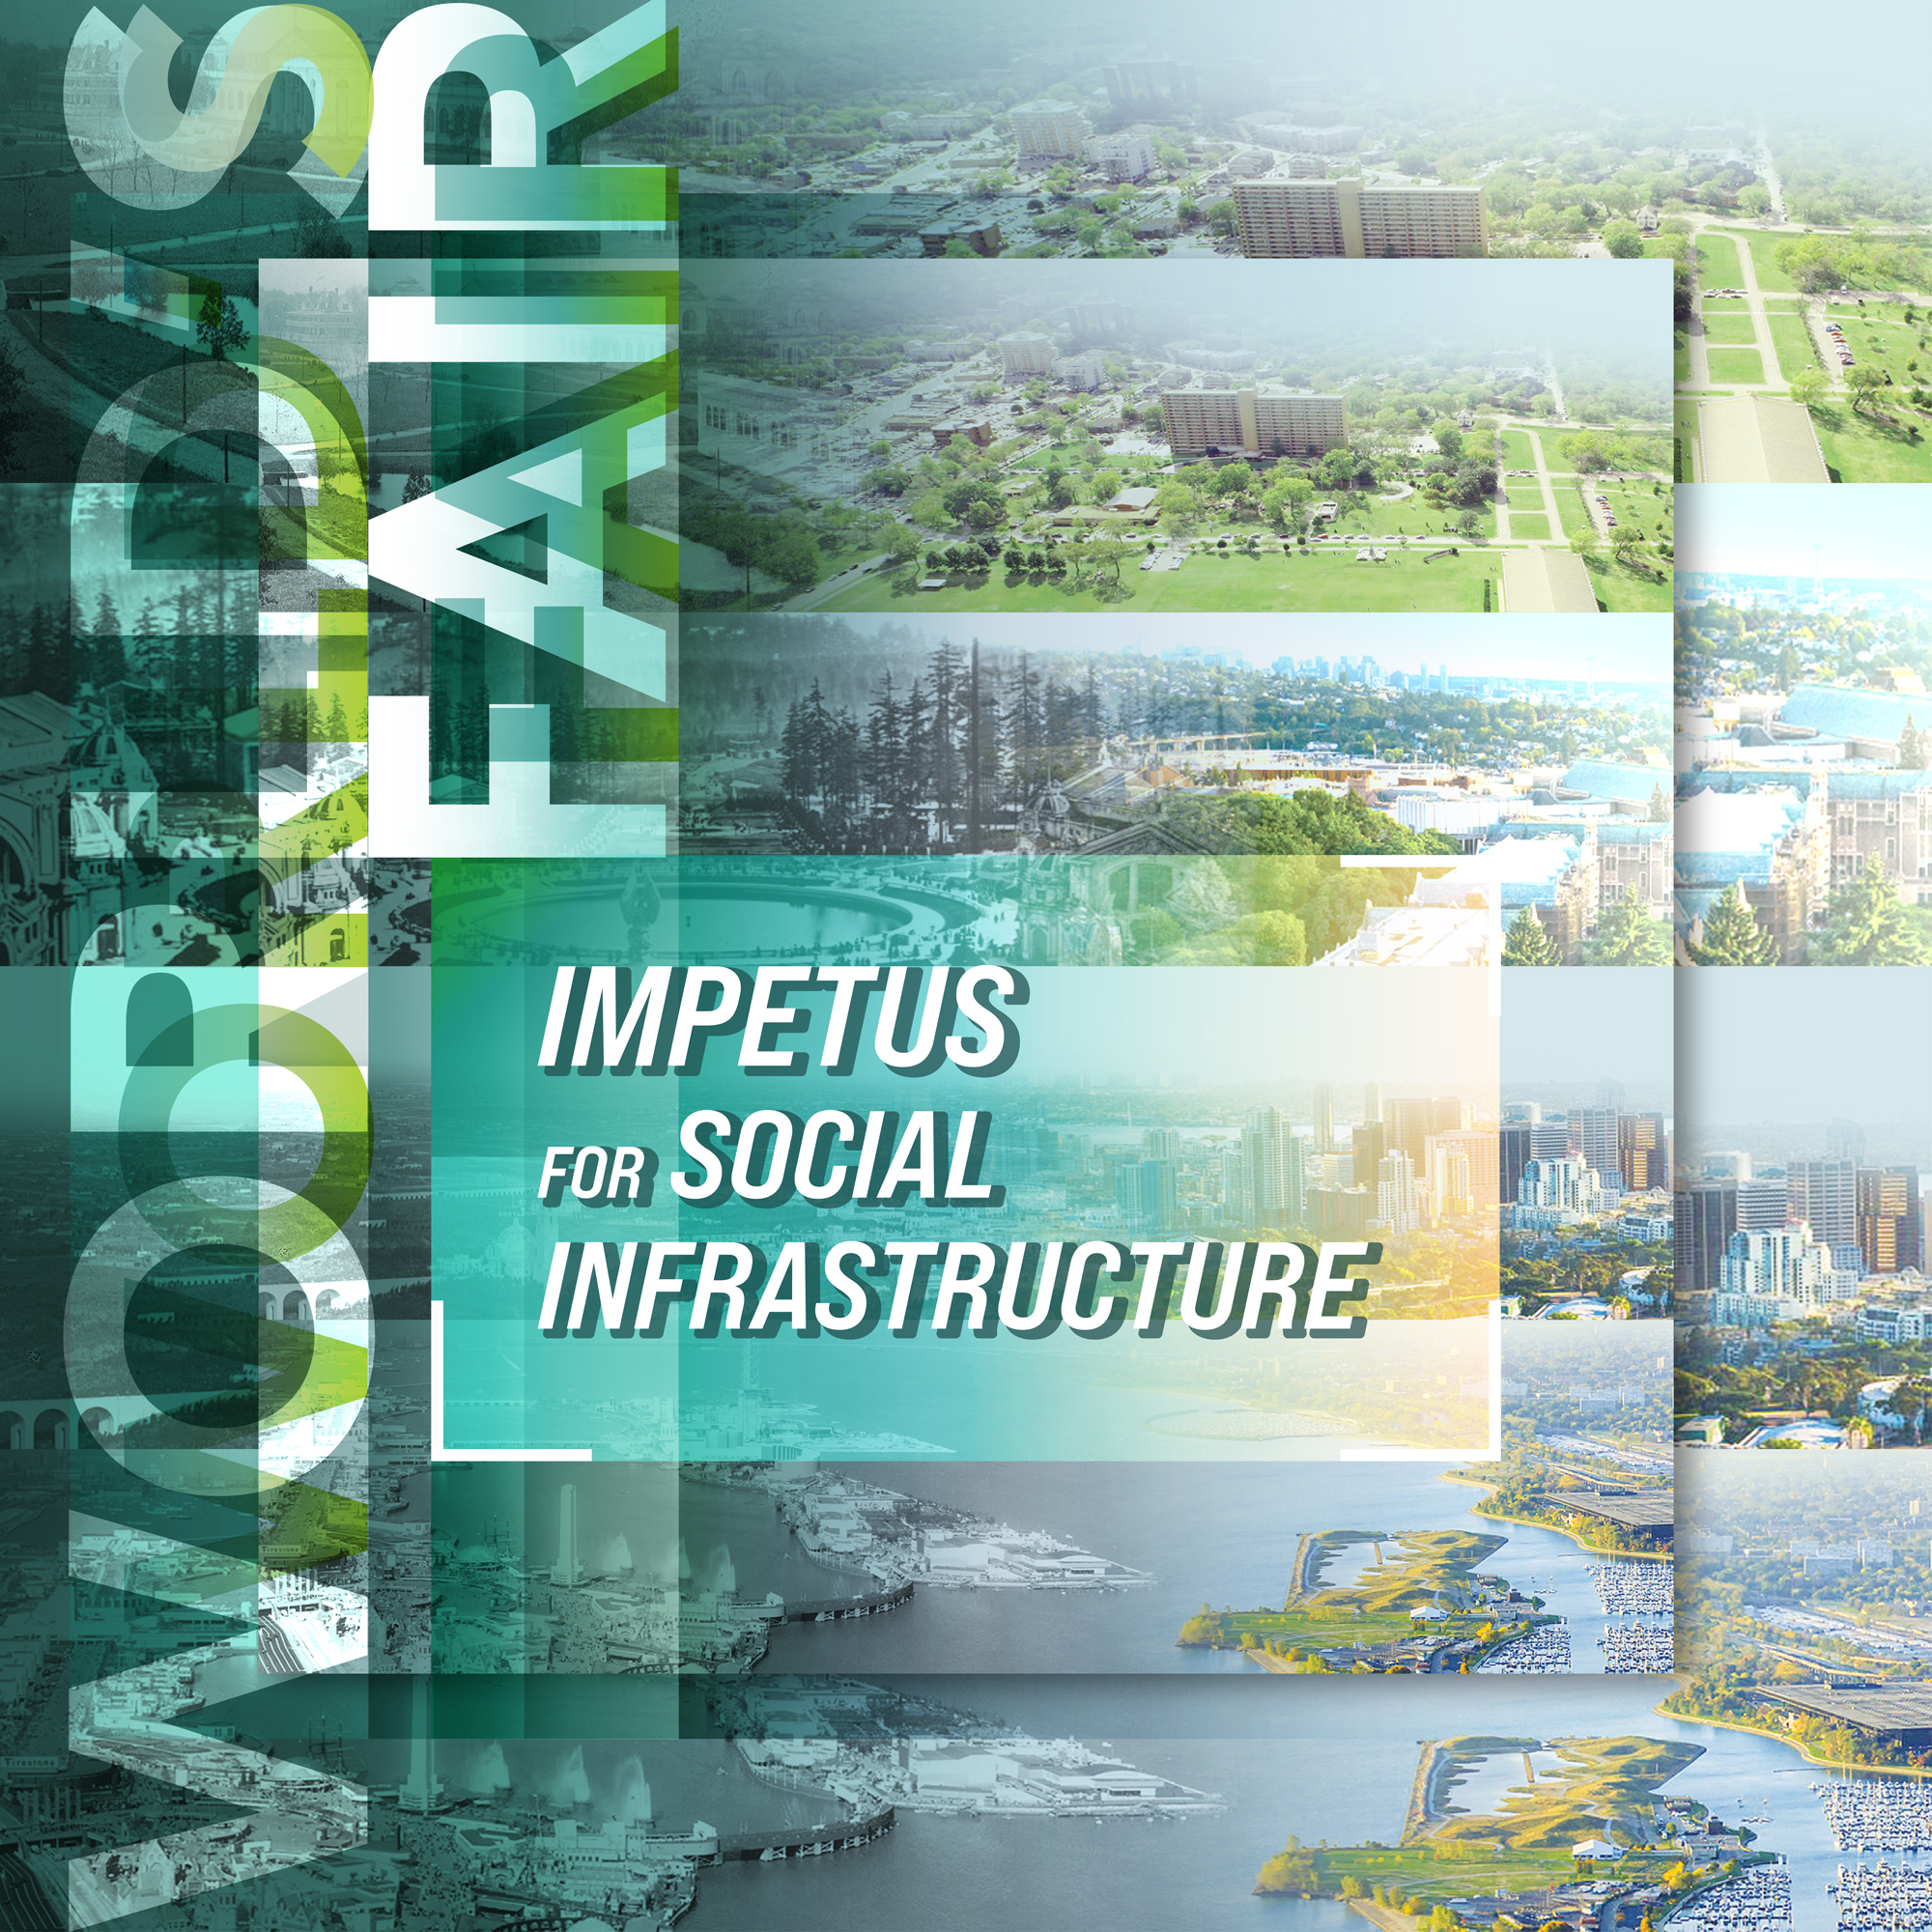 world's fair impetus for social infrastructure